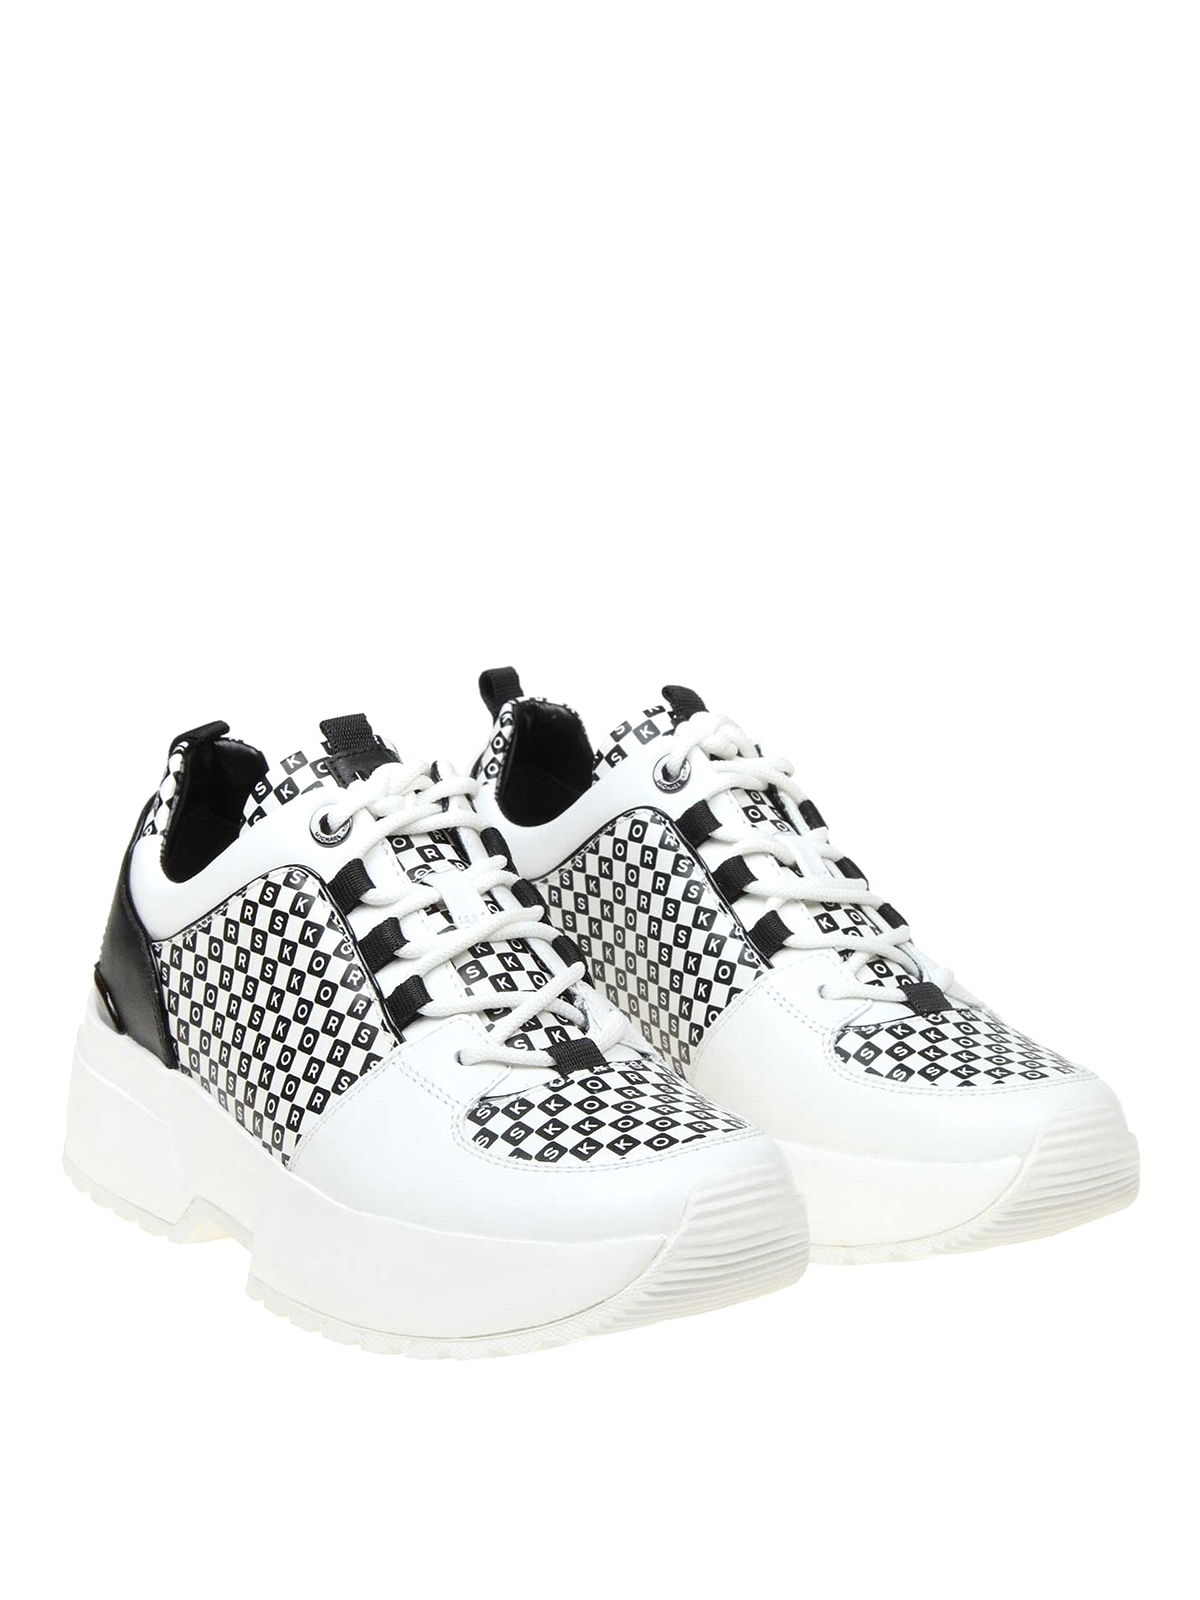 michael kors trainers black and white